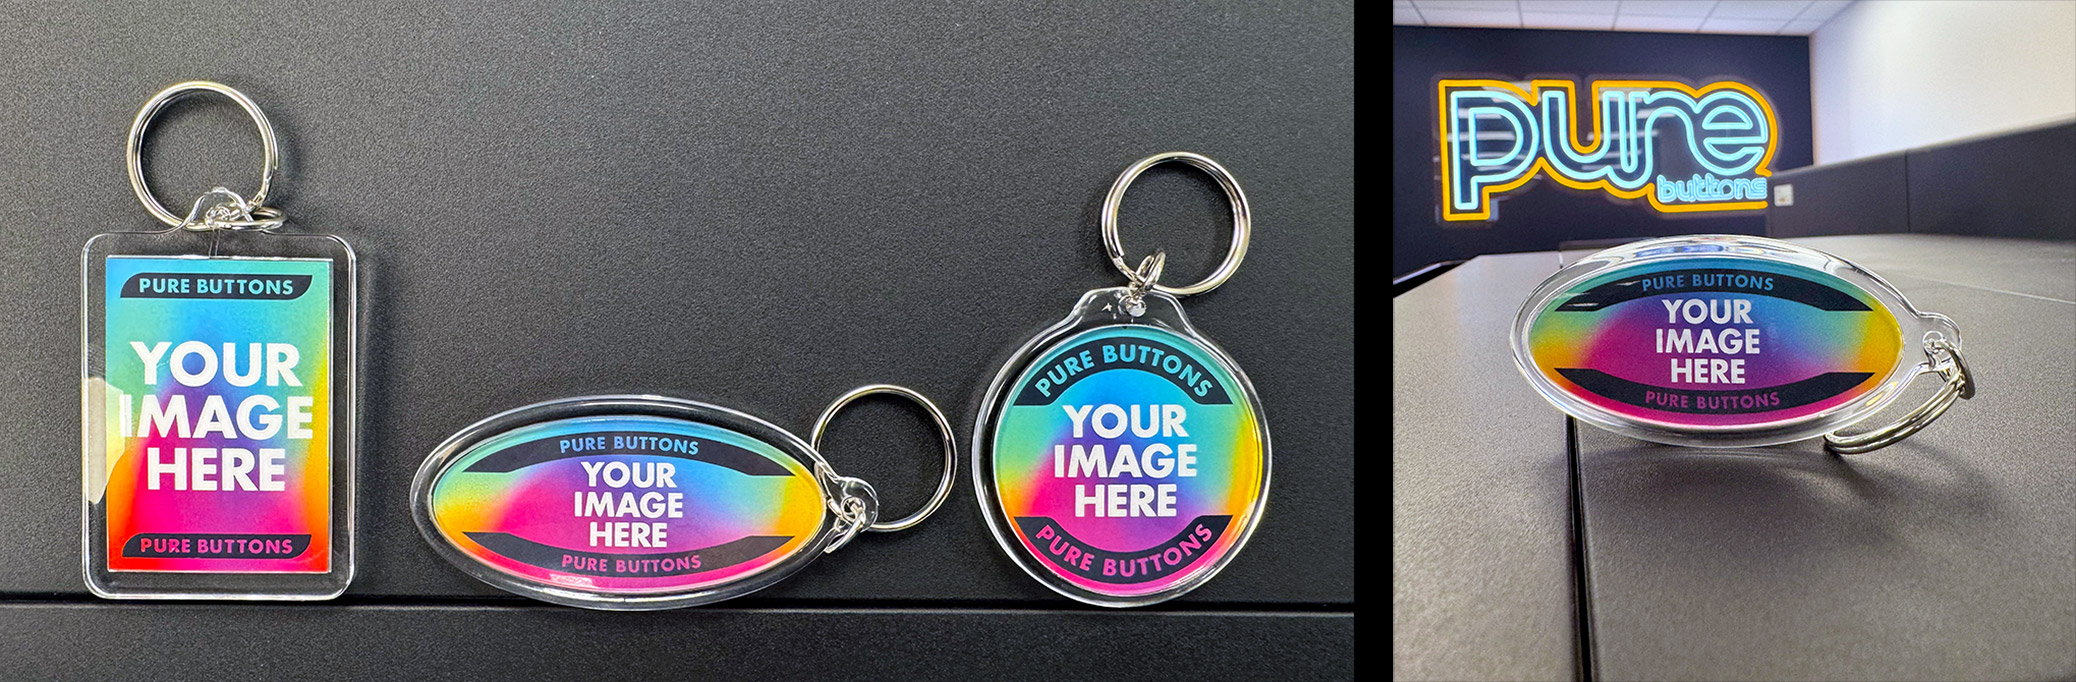 New Oval Keychains with Rectangle and Round Keychains by PureButtons.com